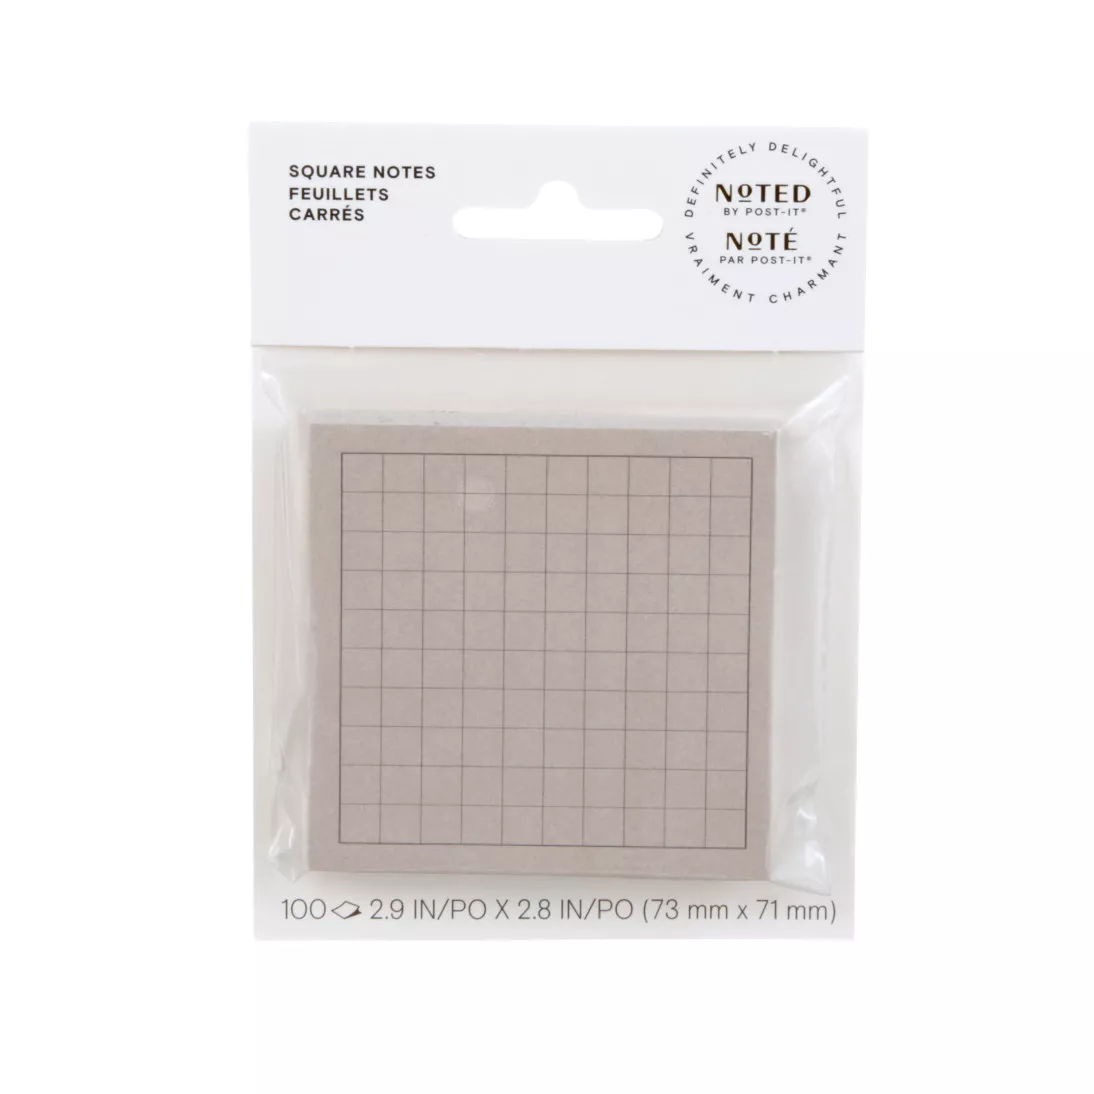 Post-it® Printed Notes NTD-33-GRY-EF, 2.9 in x 2.8 in (73 mm x 71 mm)